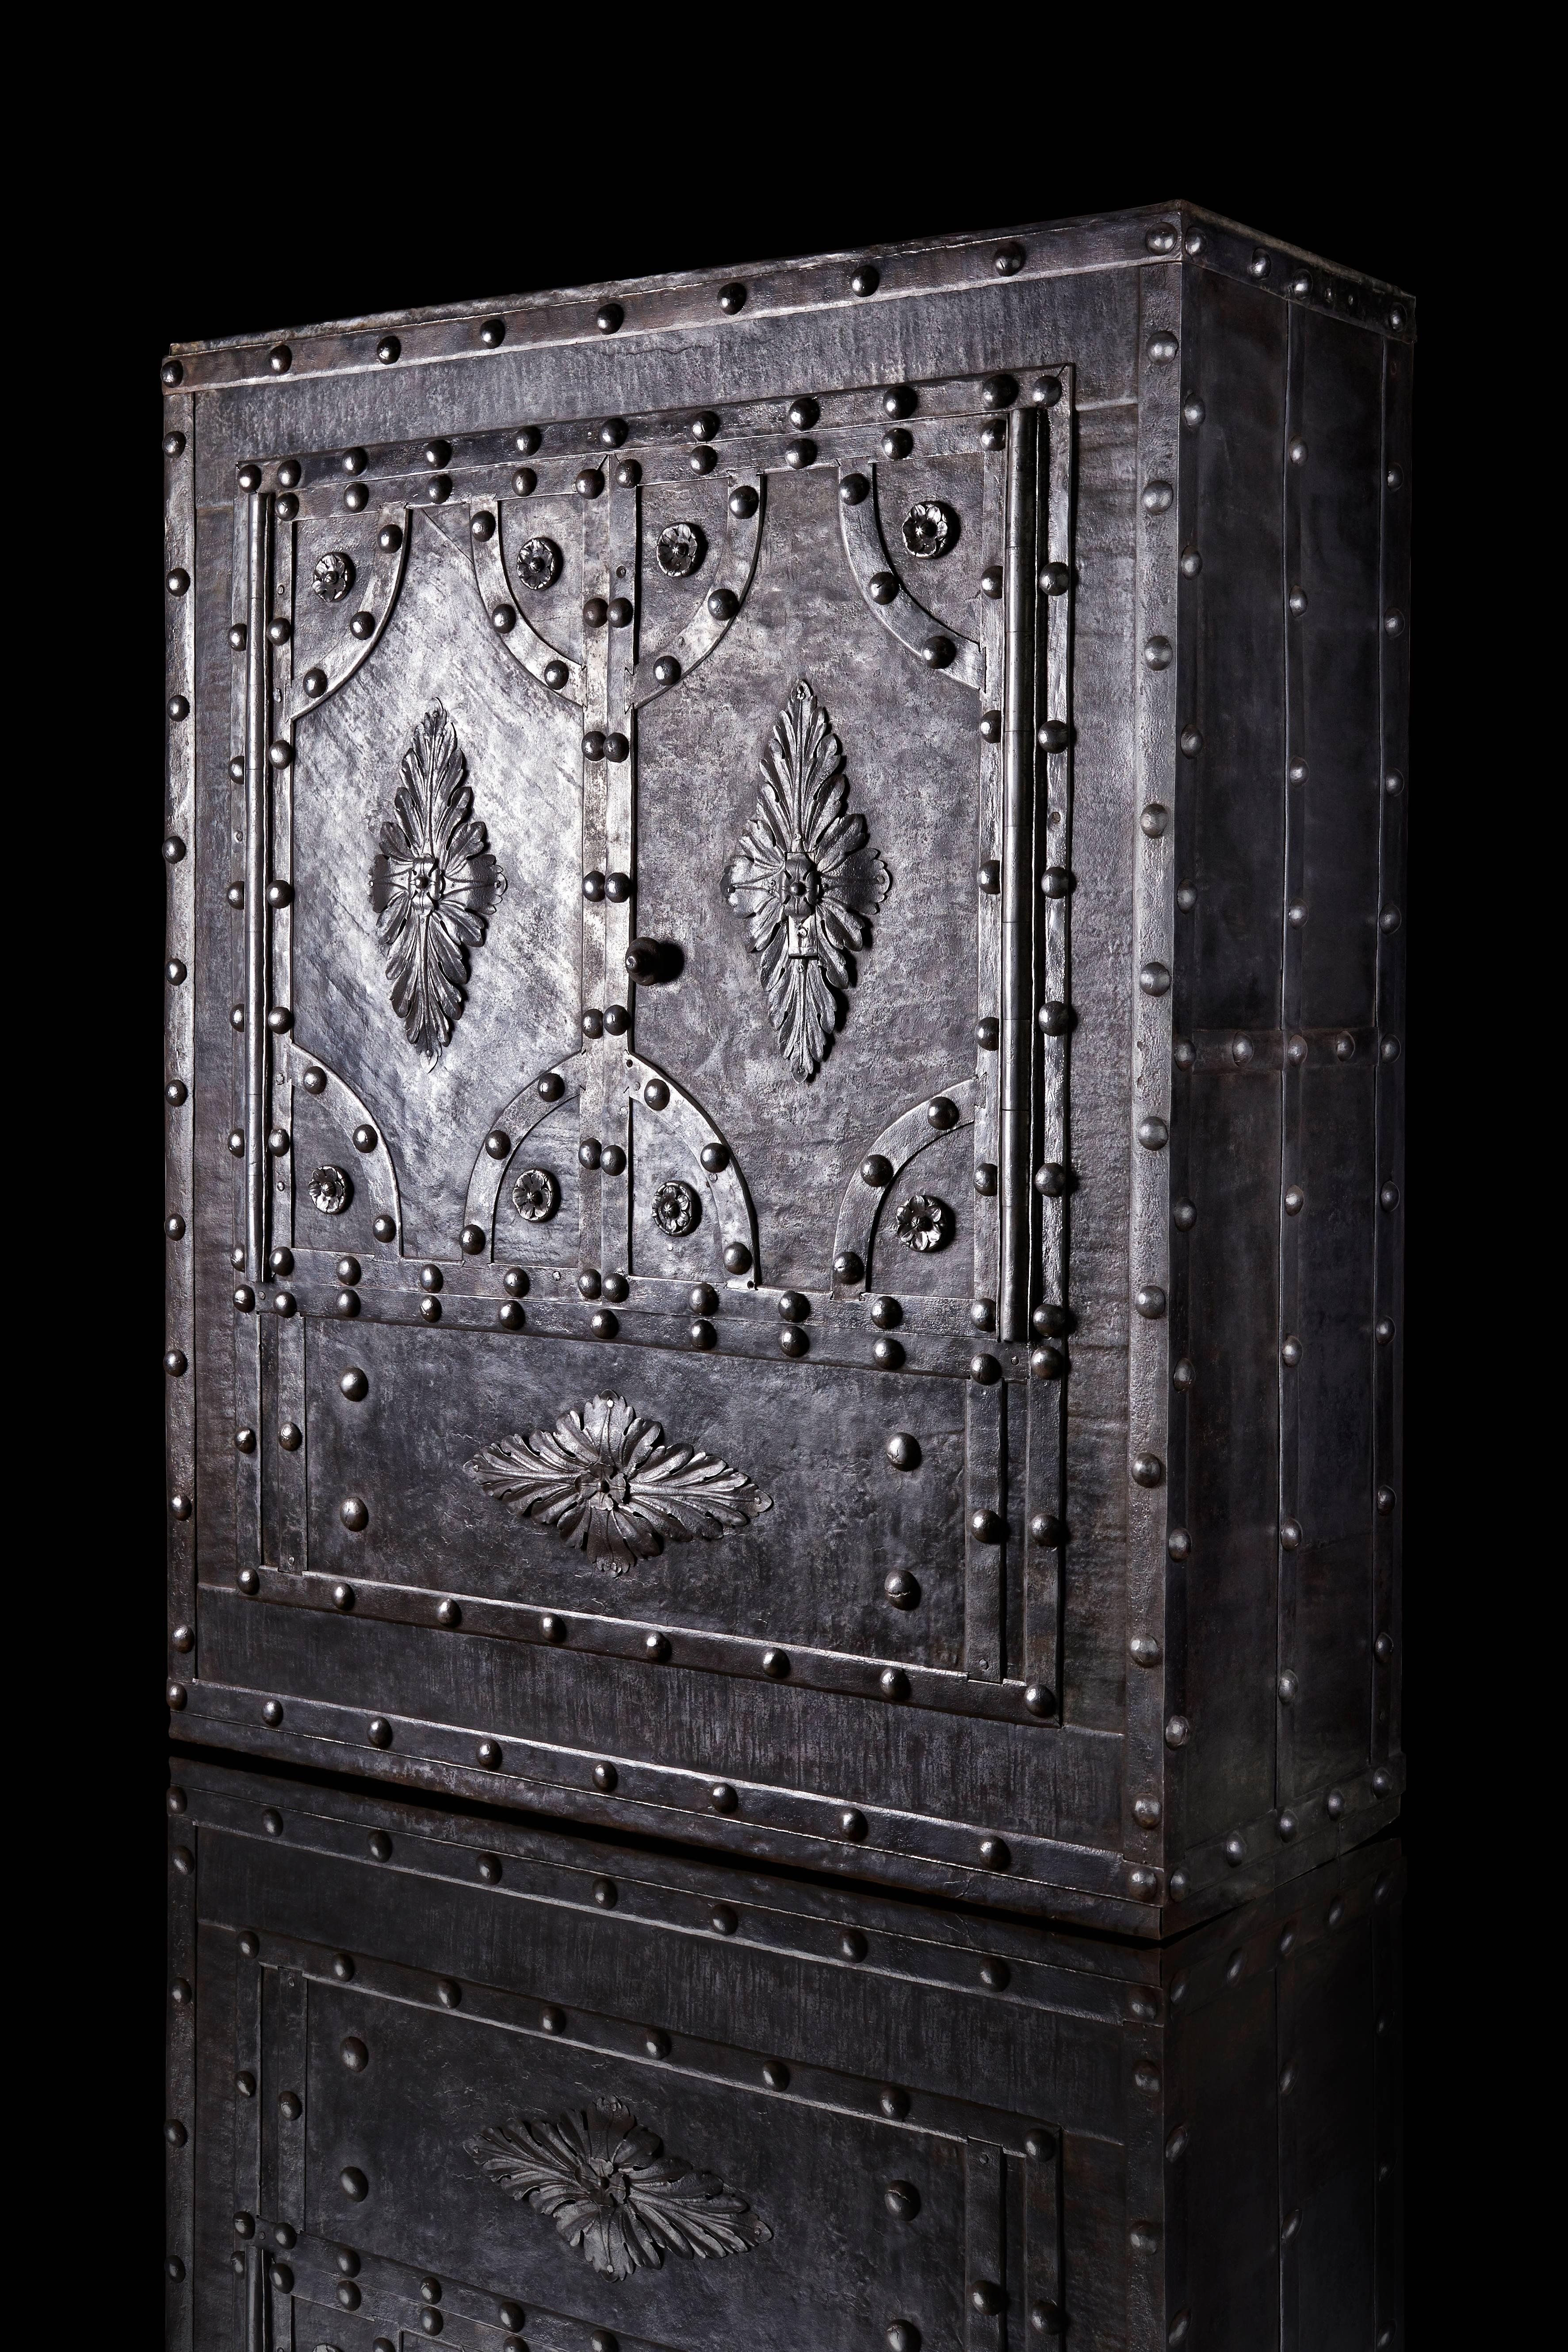 Crafted in Milan in 1824 by master blacksmith Mr. Giuseppe Bettiga as signed on the internal of the right door, this very rare double leaf door safe has beautiful decorations that hide incredible locks and opening secret combination that works with